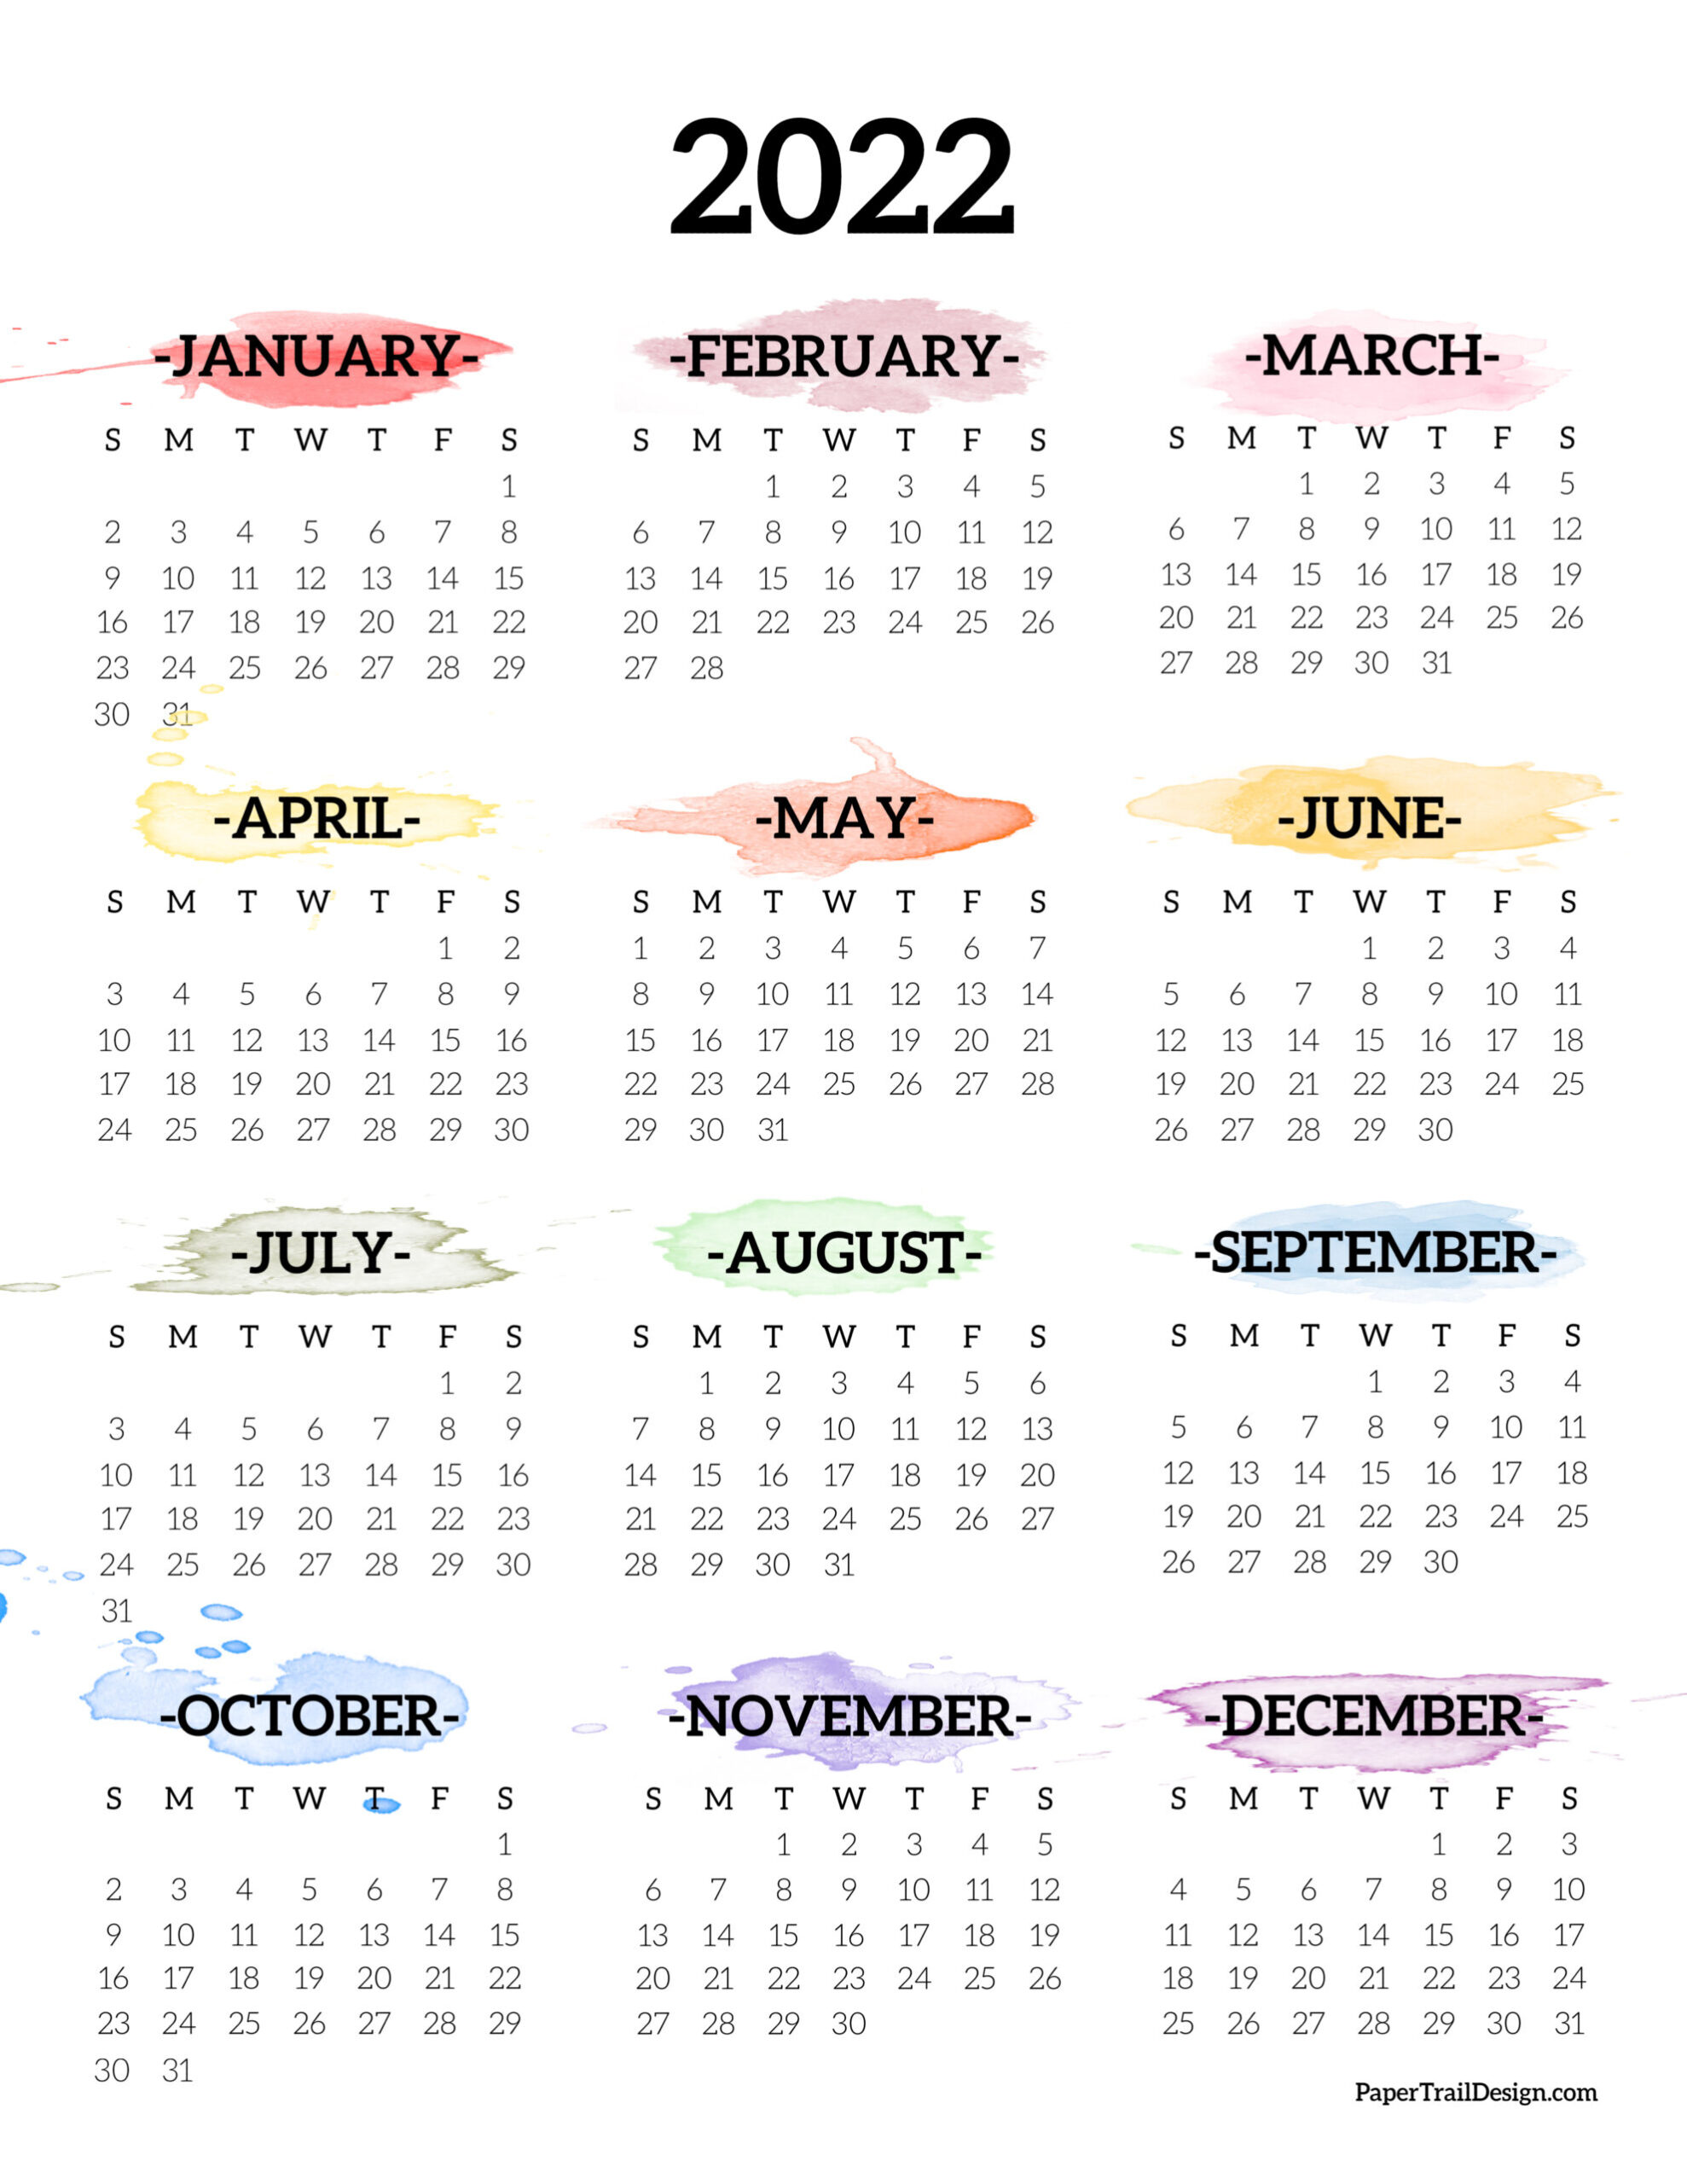 2022 One Page Calendar Printable - Watercolor | Paper